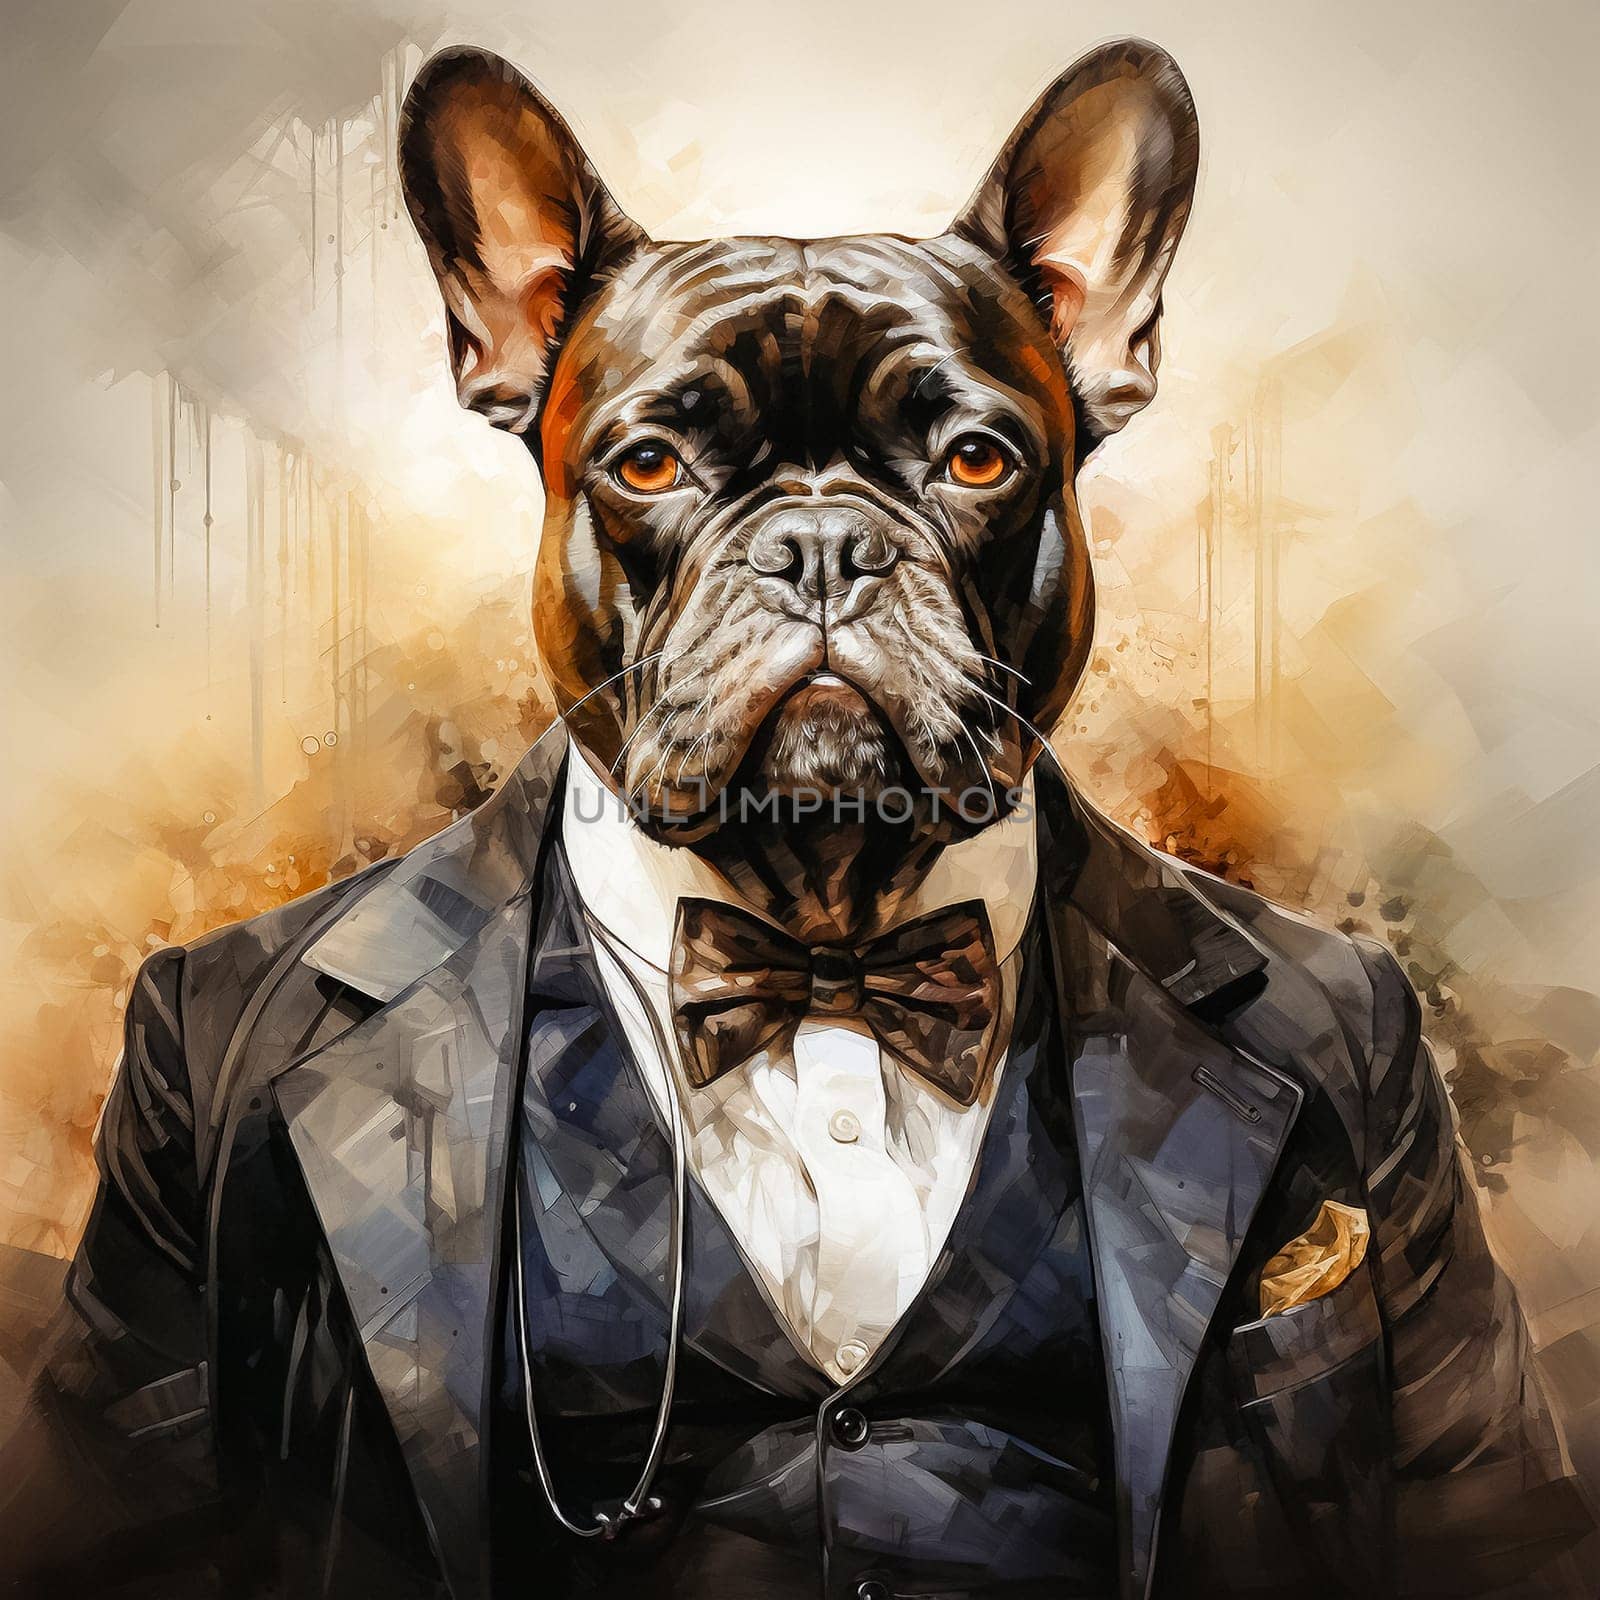 A business watercolor of a dog in an elegant suit is a whimsical combination of the business world and natural charm, depicted with artistic flair.